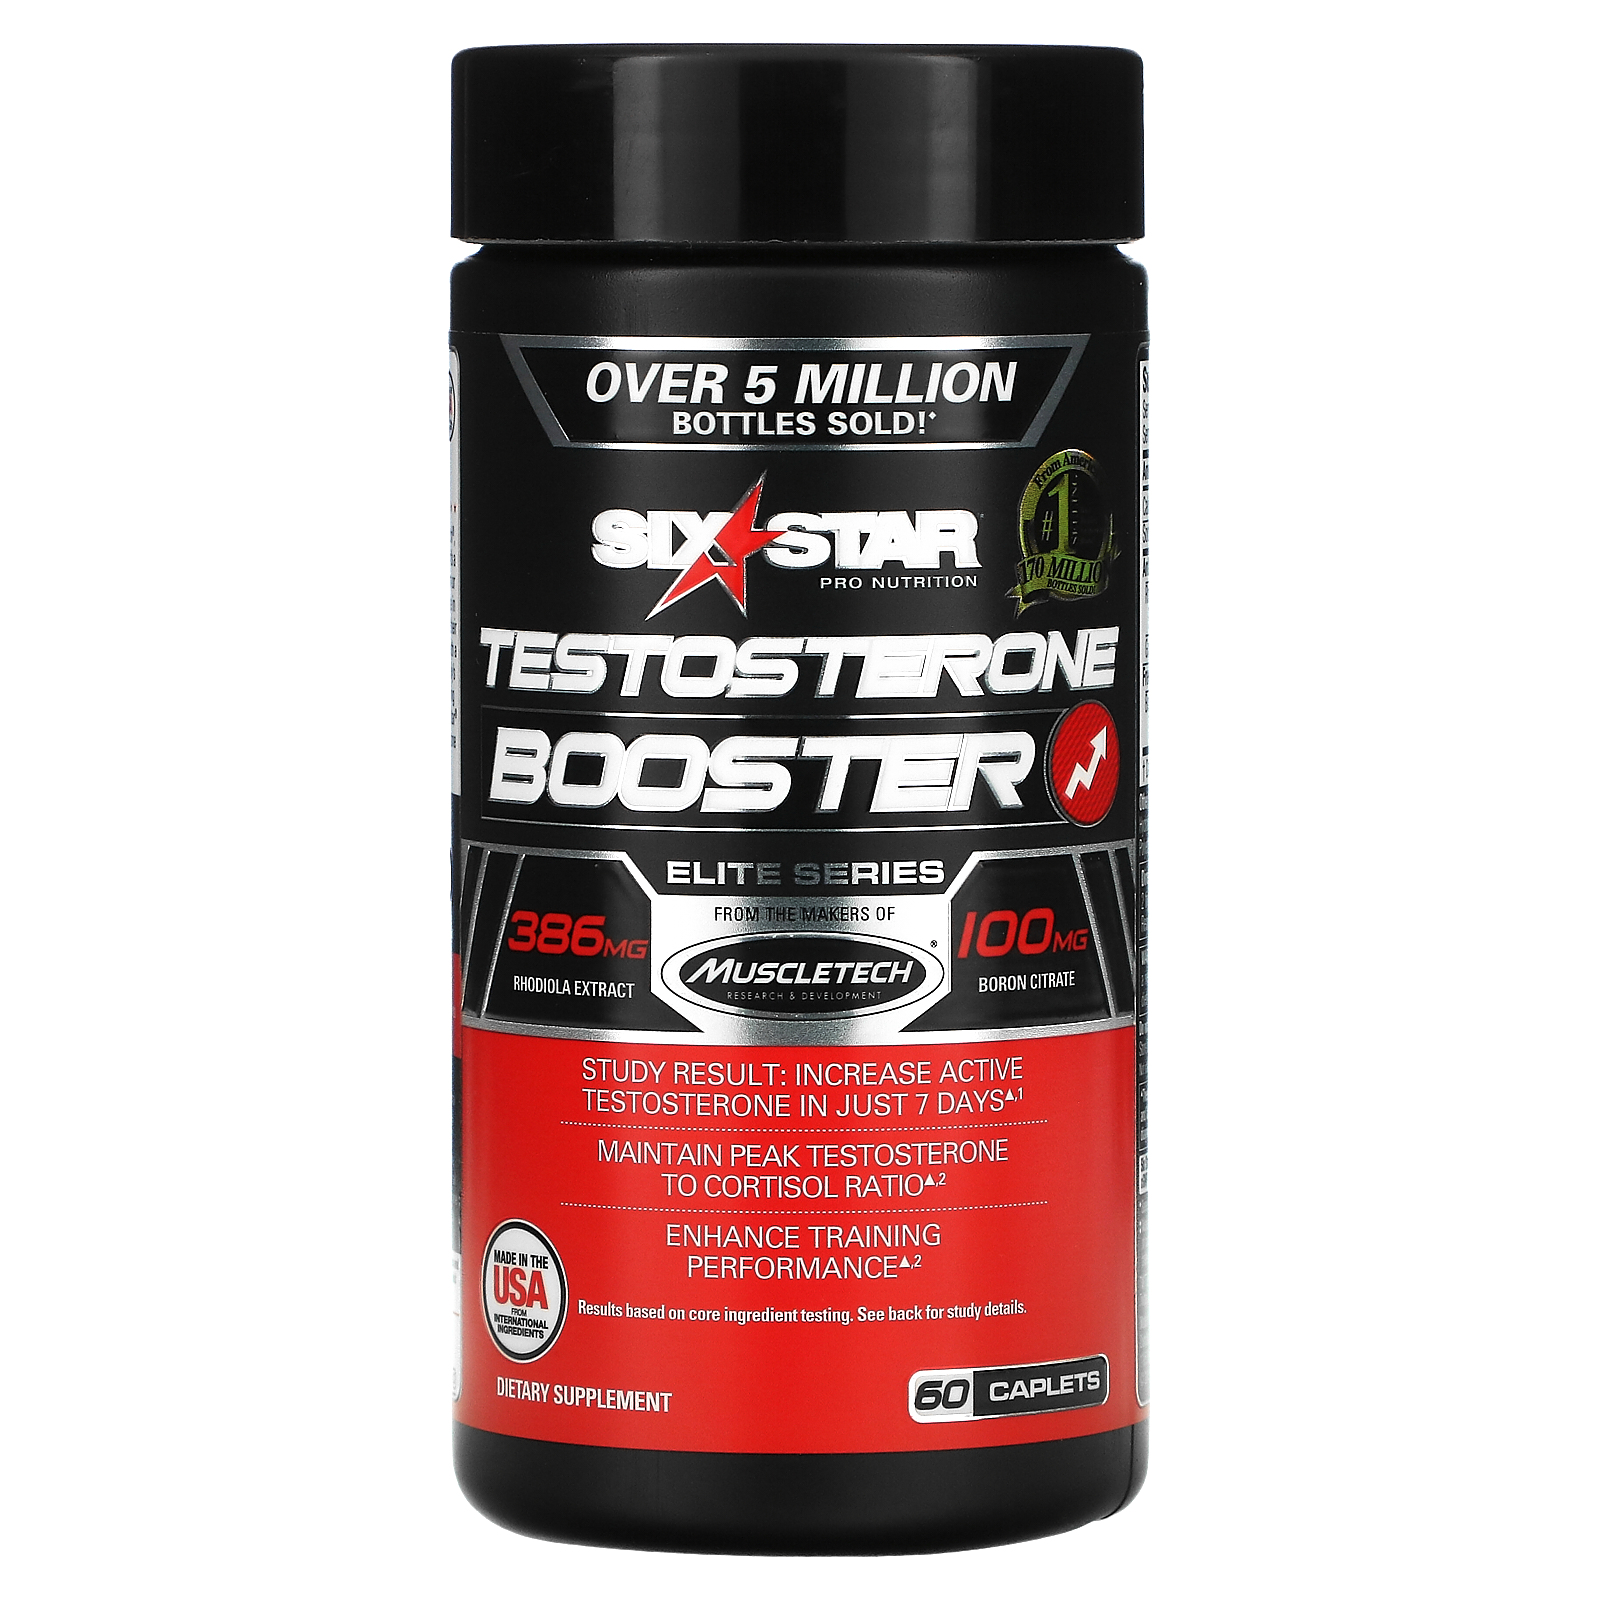 Testosterone Booster Six Star Para Que Sirve